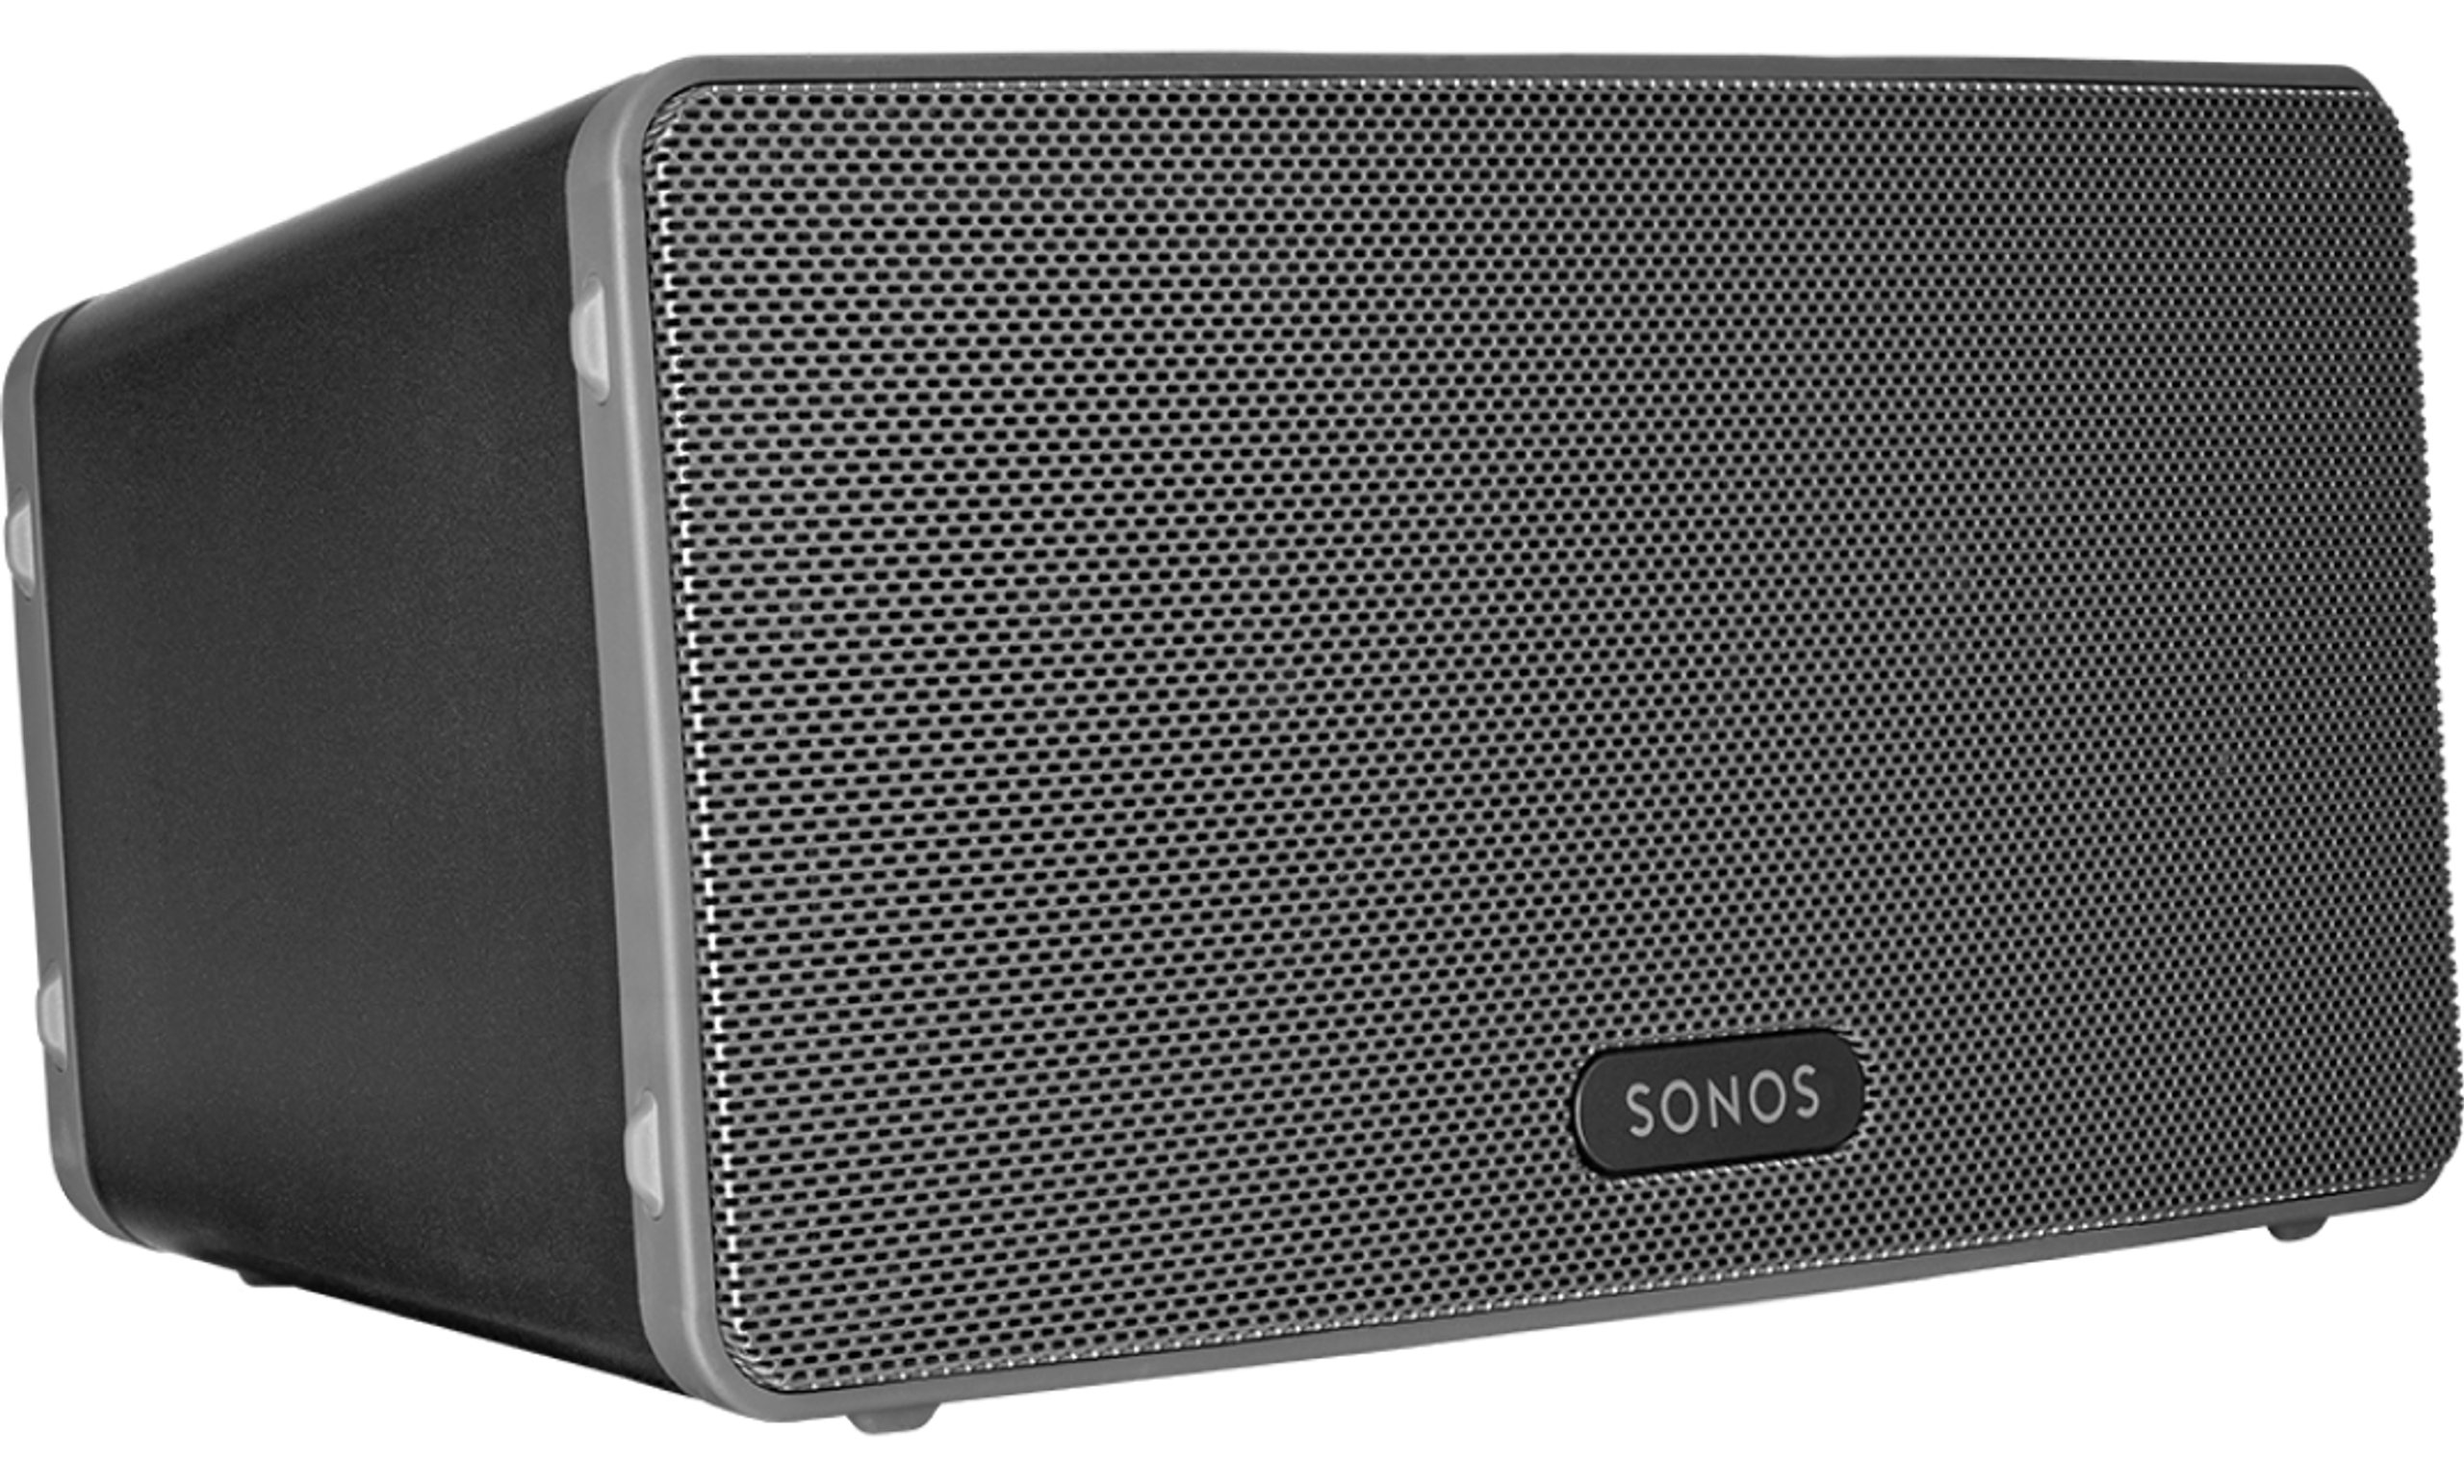 Set up your Sonos Play:3